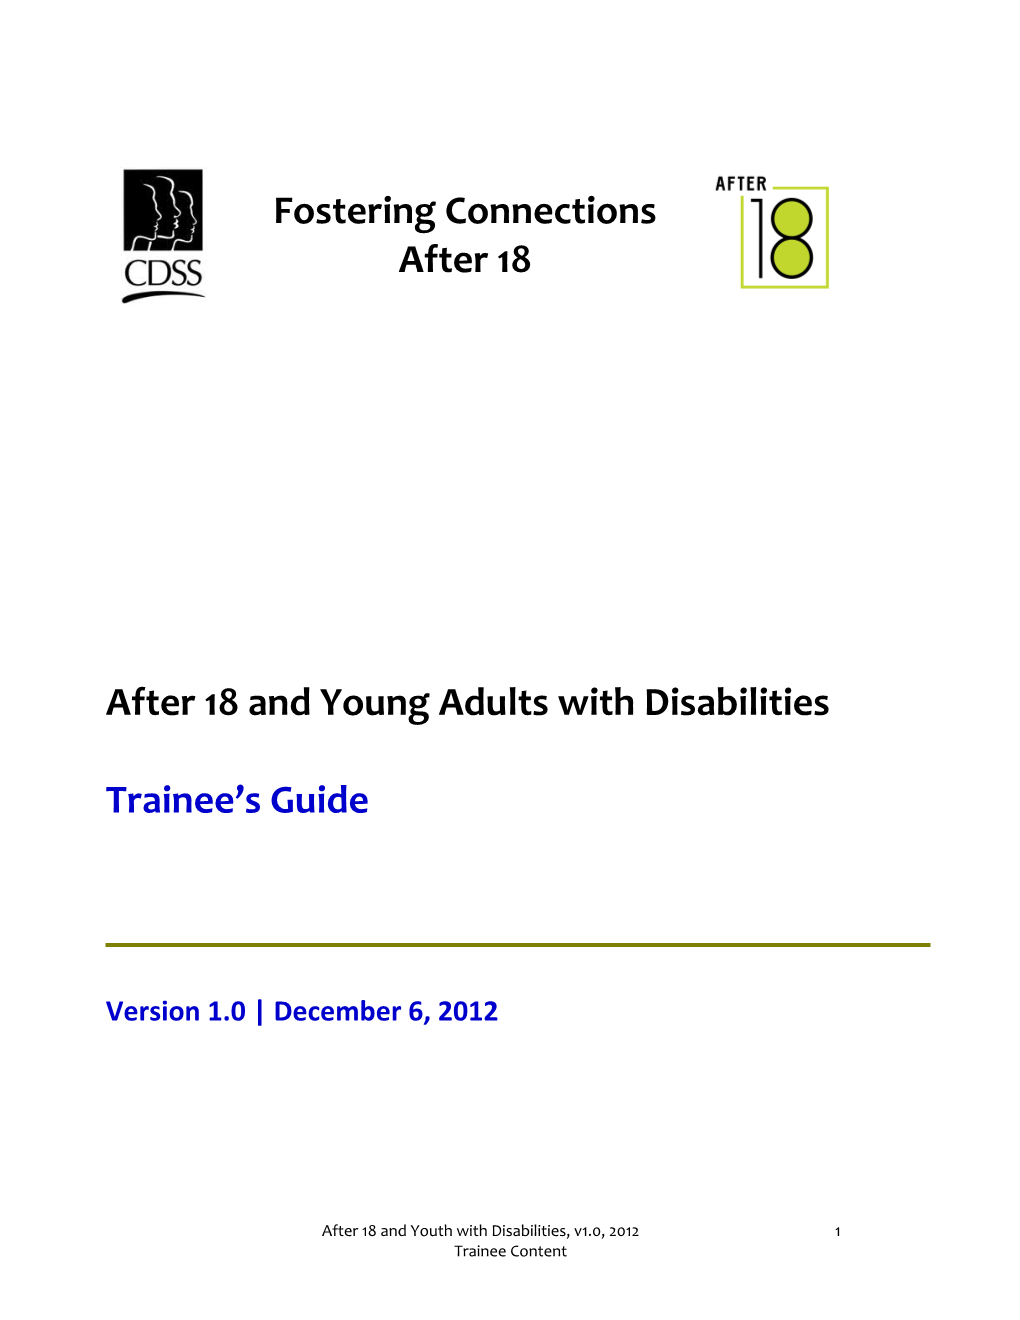 Understanding Benefits for Transition Aged Youth